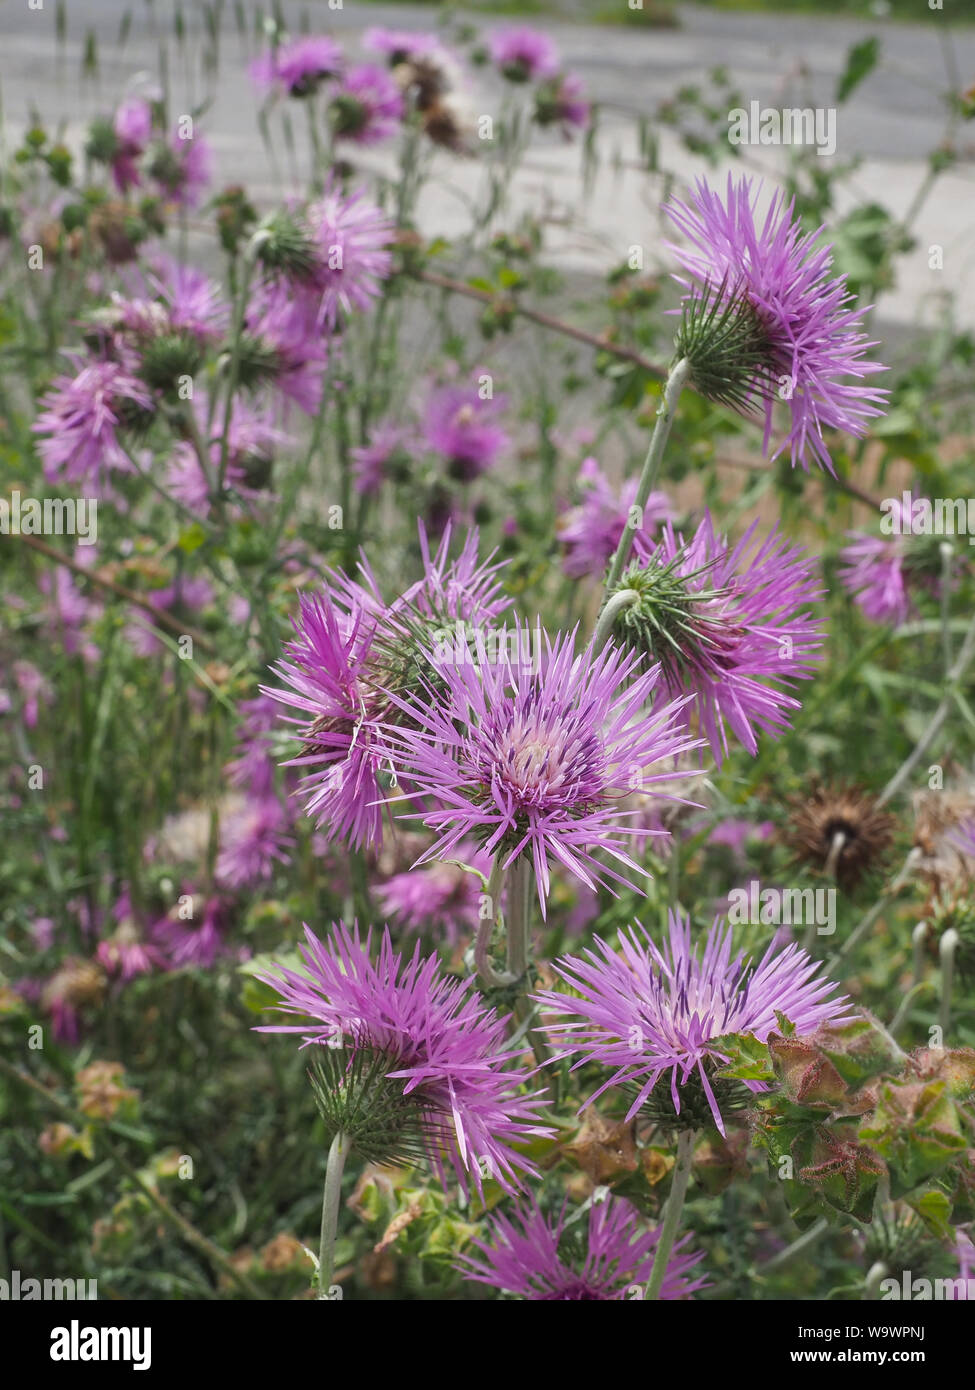 Field of pink wild thistle flowers. Galactites tomentosa or purple milk thistle is herbaceous edible plant of the Asteraceae family. Herb with spines. Stock Photo